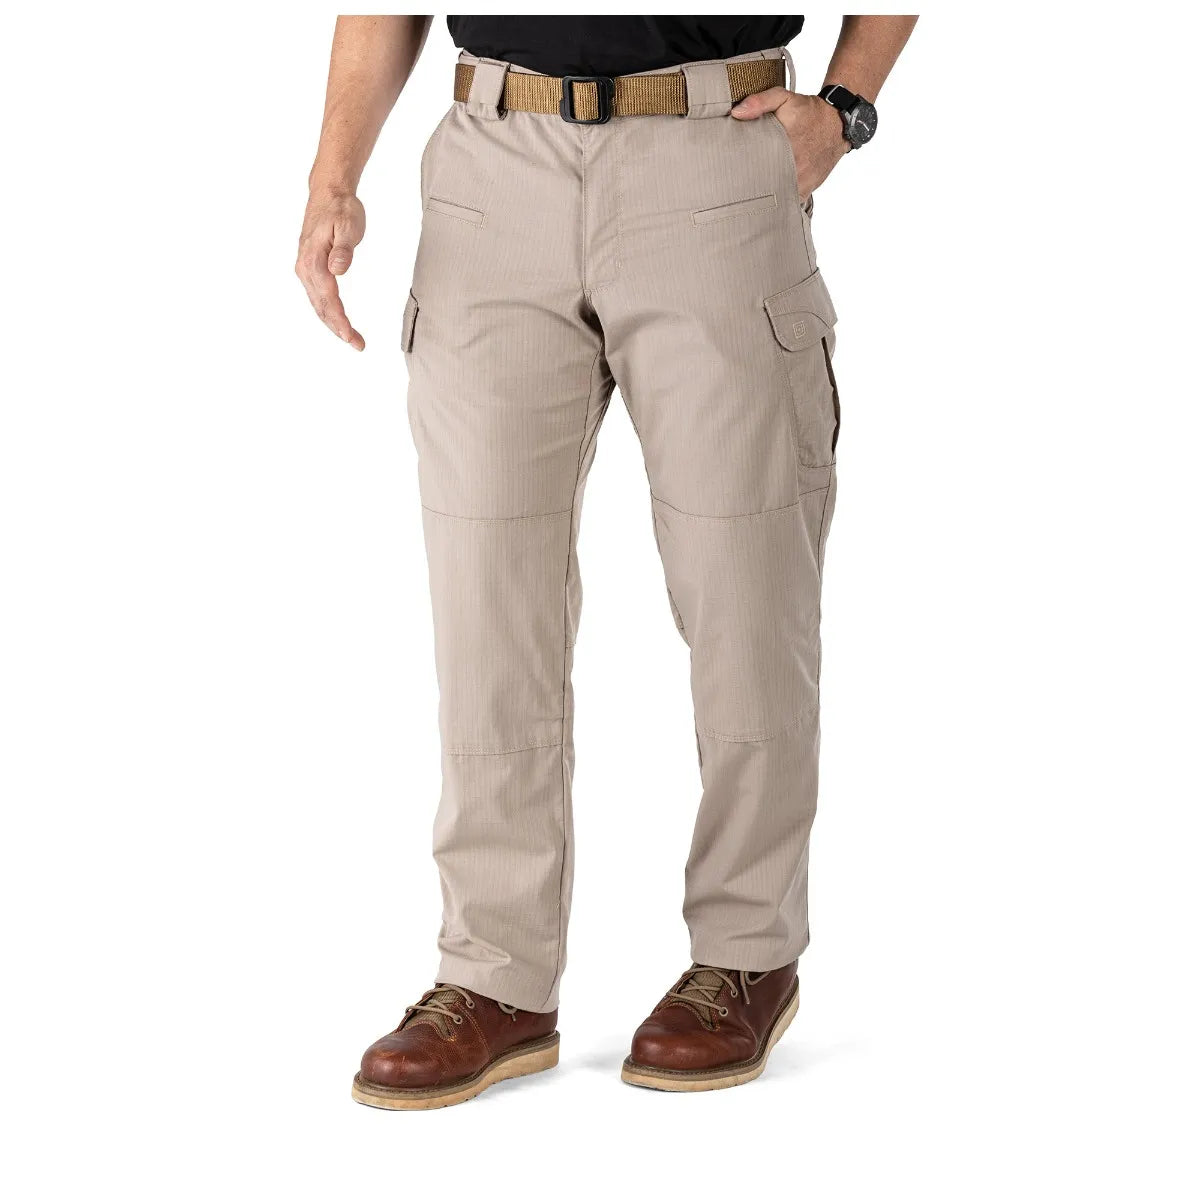 Gusseted Construction Pant: Enhances mobility during tactical maneuvers.